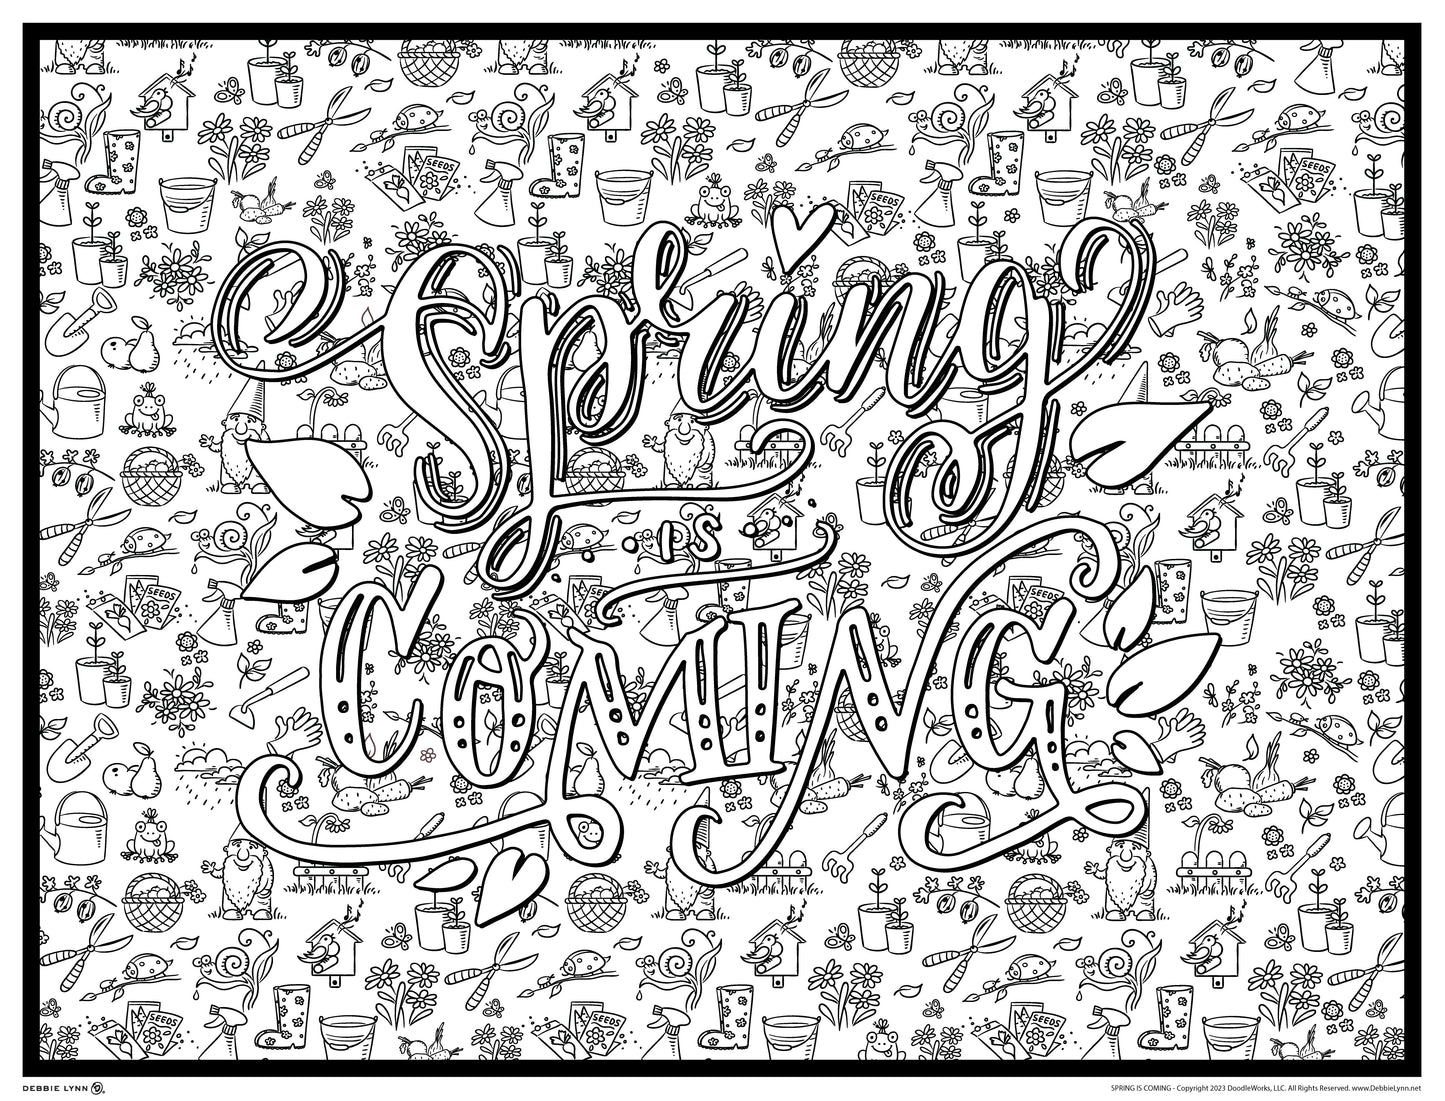 Spring Coming Personalized Giant Coloring Poster 46"x60"